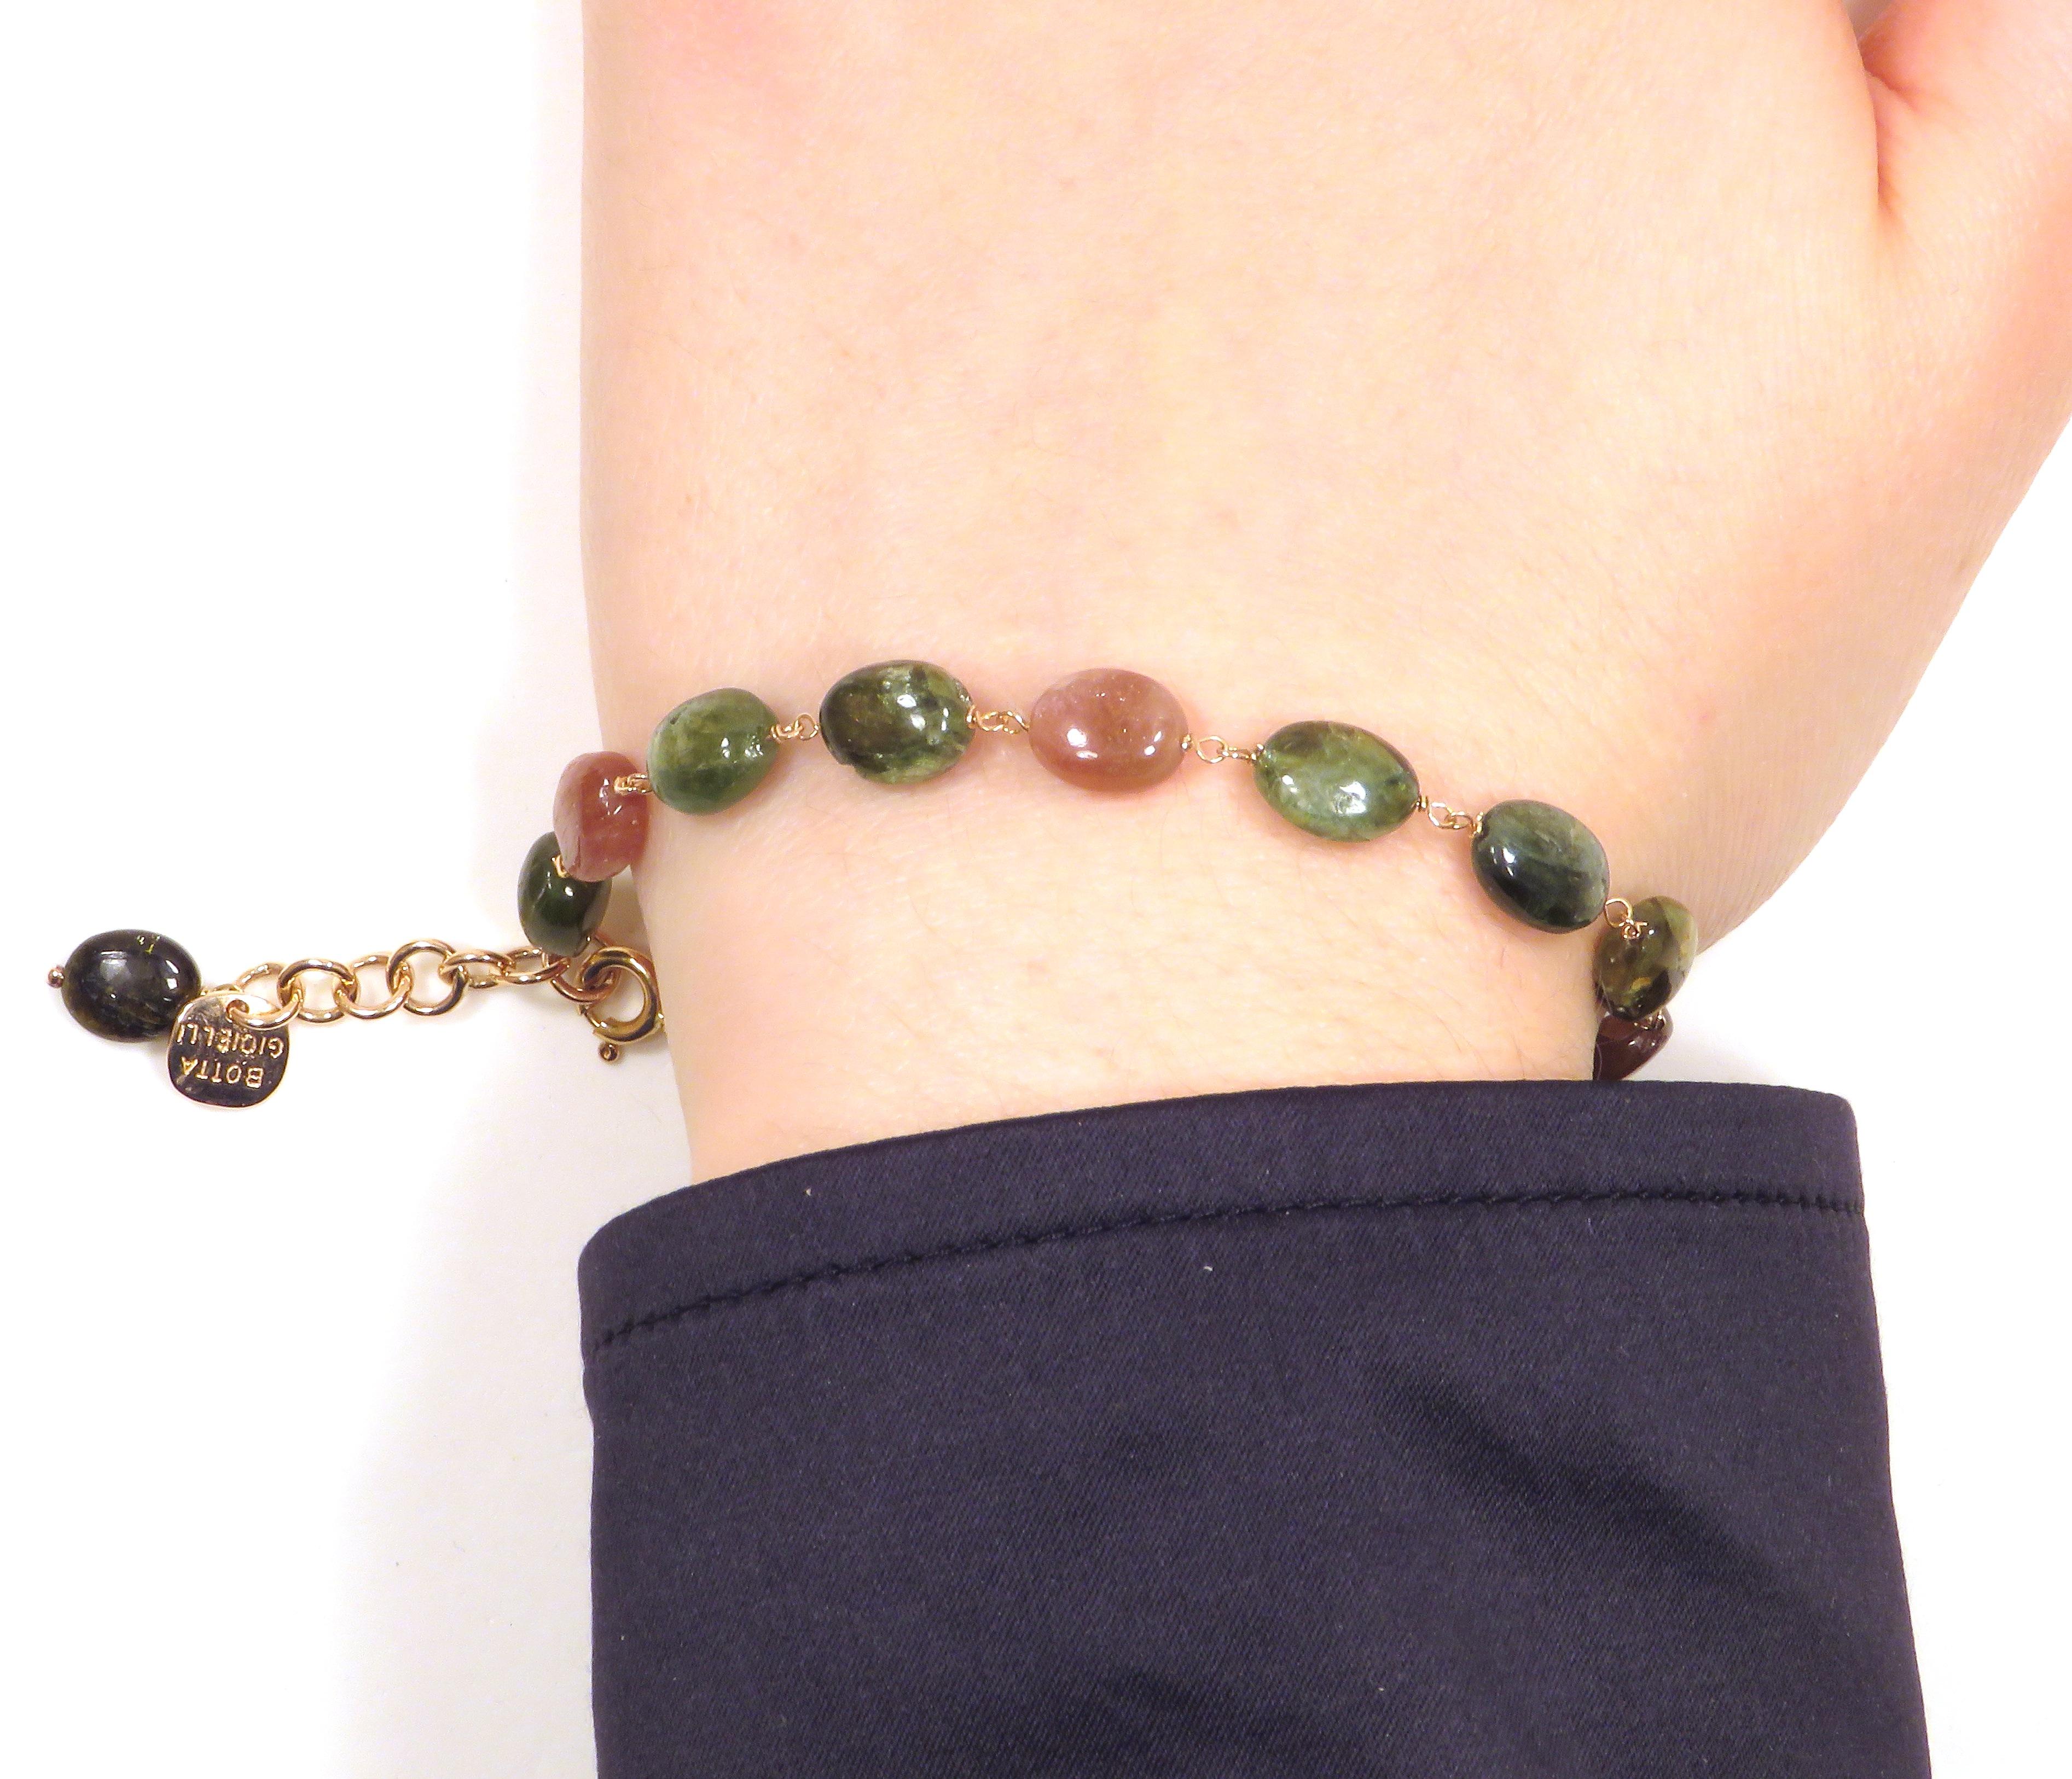 Contemporary Tourmaline Rose Gold Bracelet Handcrafted in Italy by Botta Gioielli